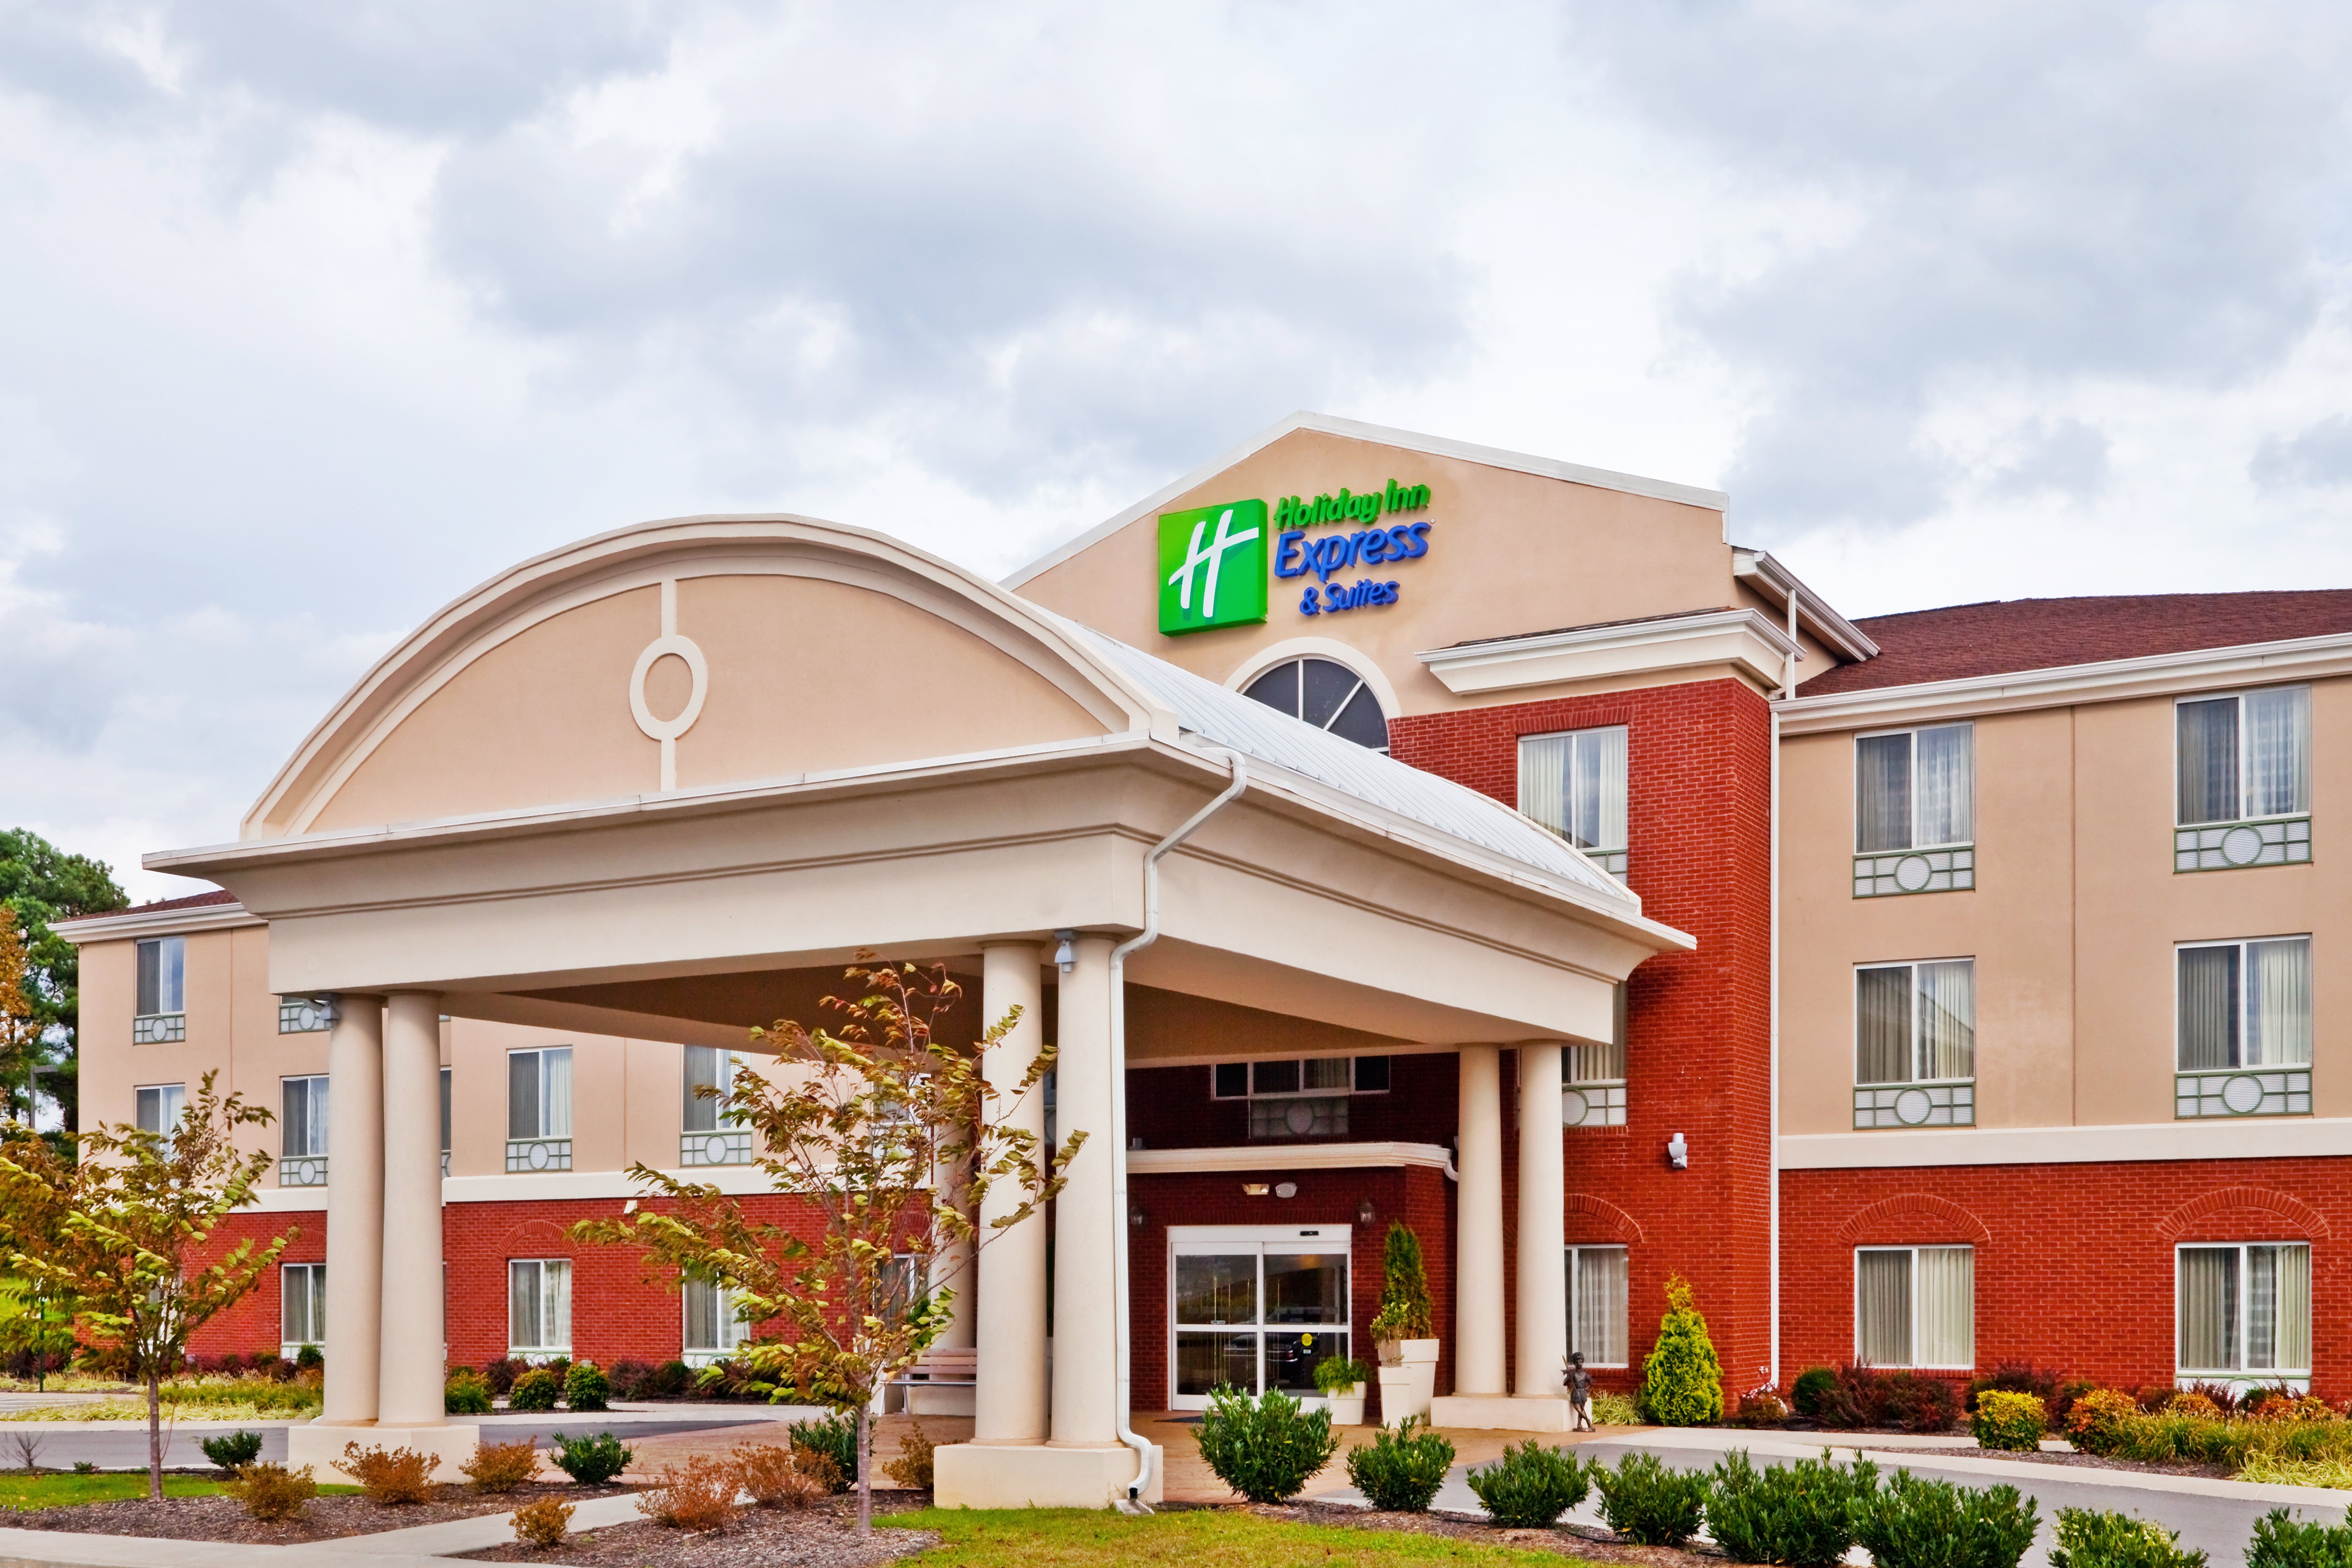 Welcome to the Holiday Inn Express & Suites Dickson